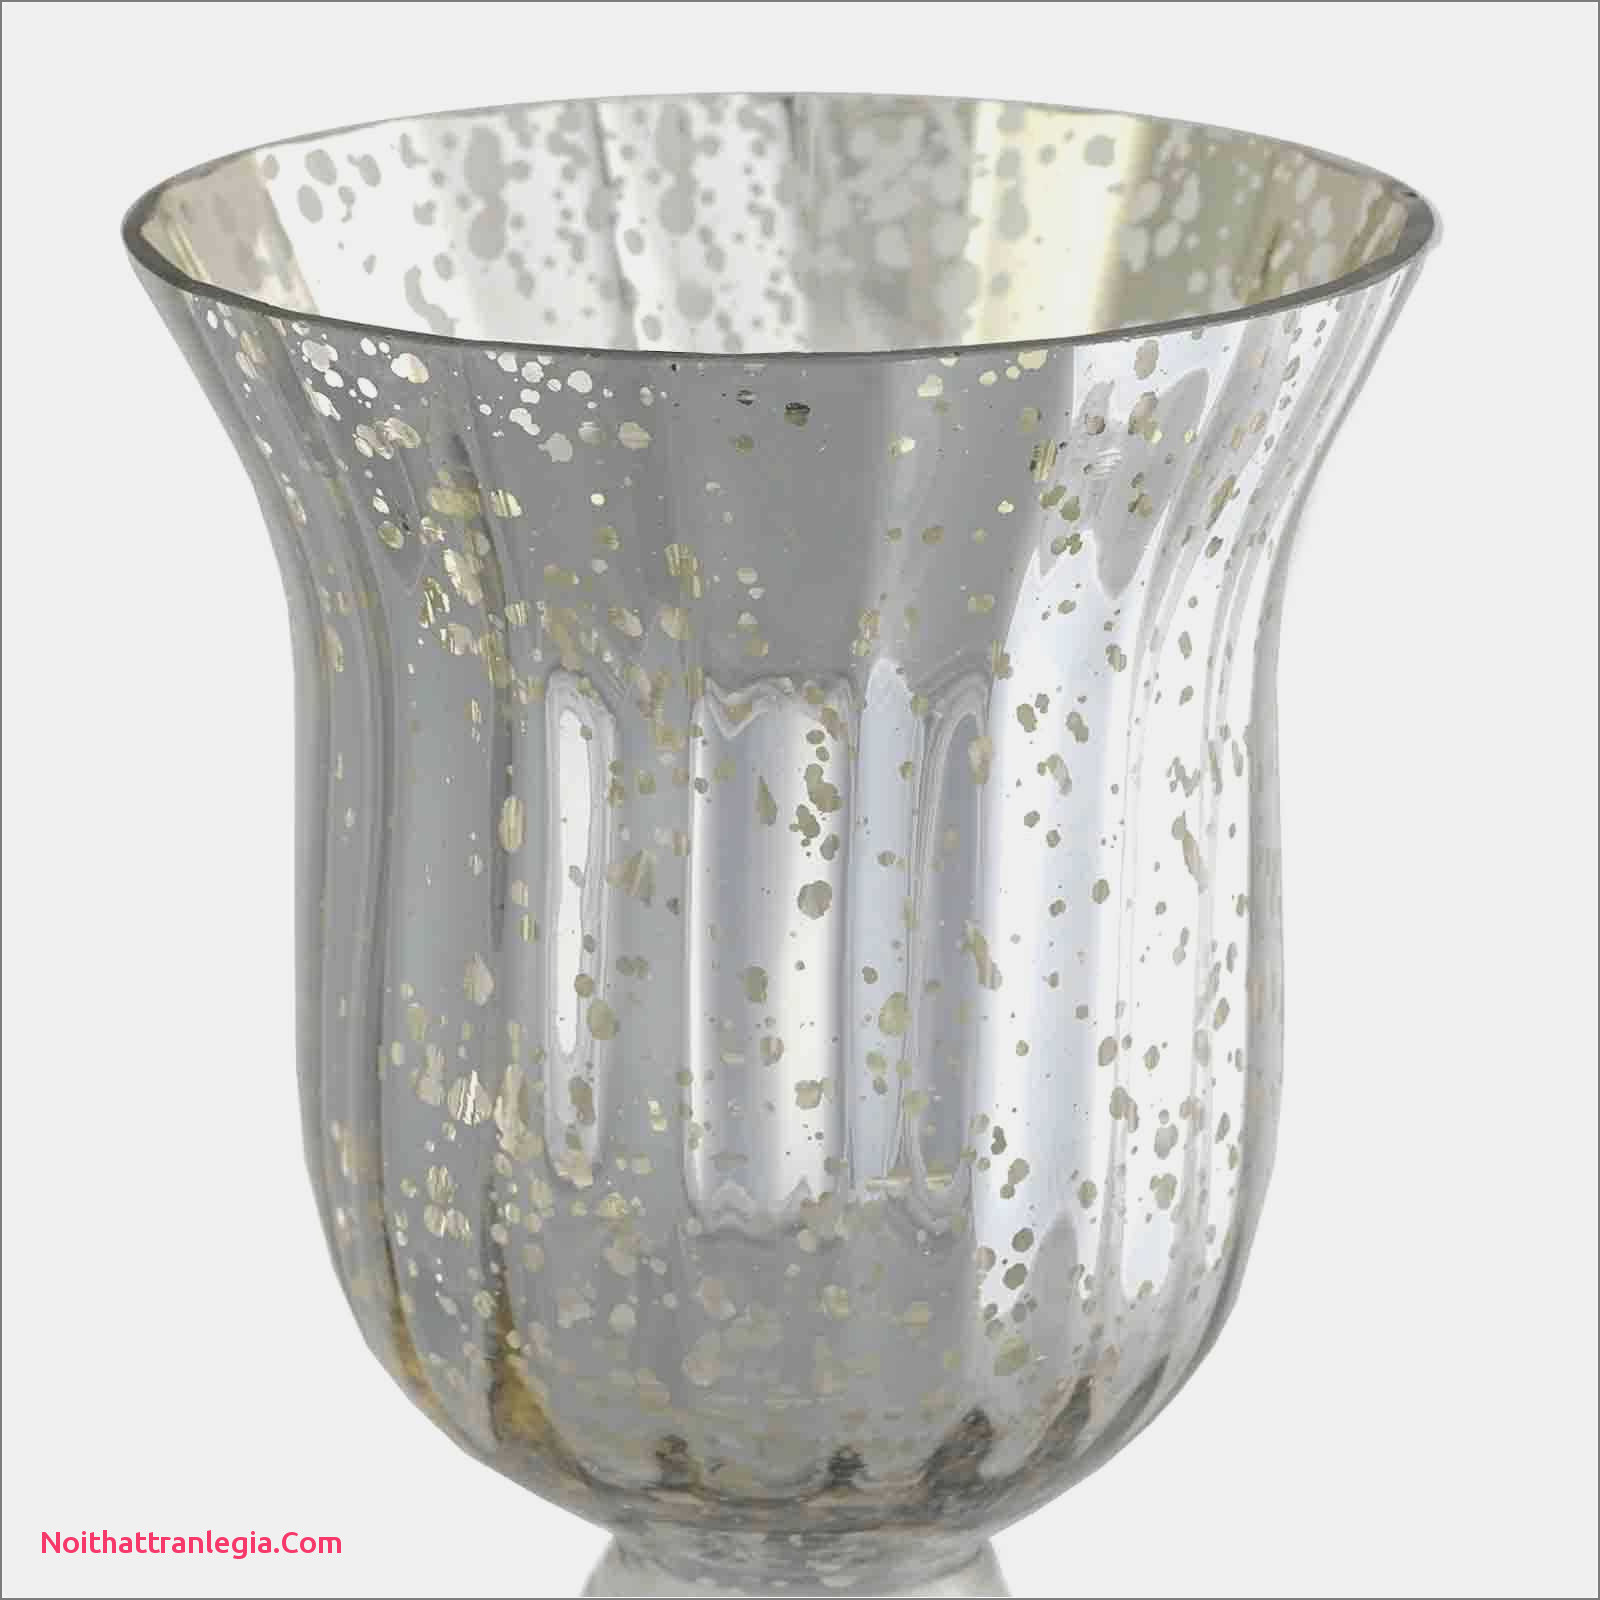 Small Crystal Vase Of 20 Wedding Vases Noithattranlegia Vases Design Pertaining to Wedding Guest Gift Ideas Inspirational Candles for Wedding Favors Superb Pe S5h Vases Candle Vase I